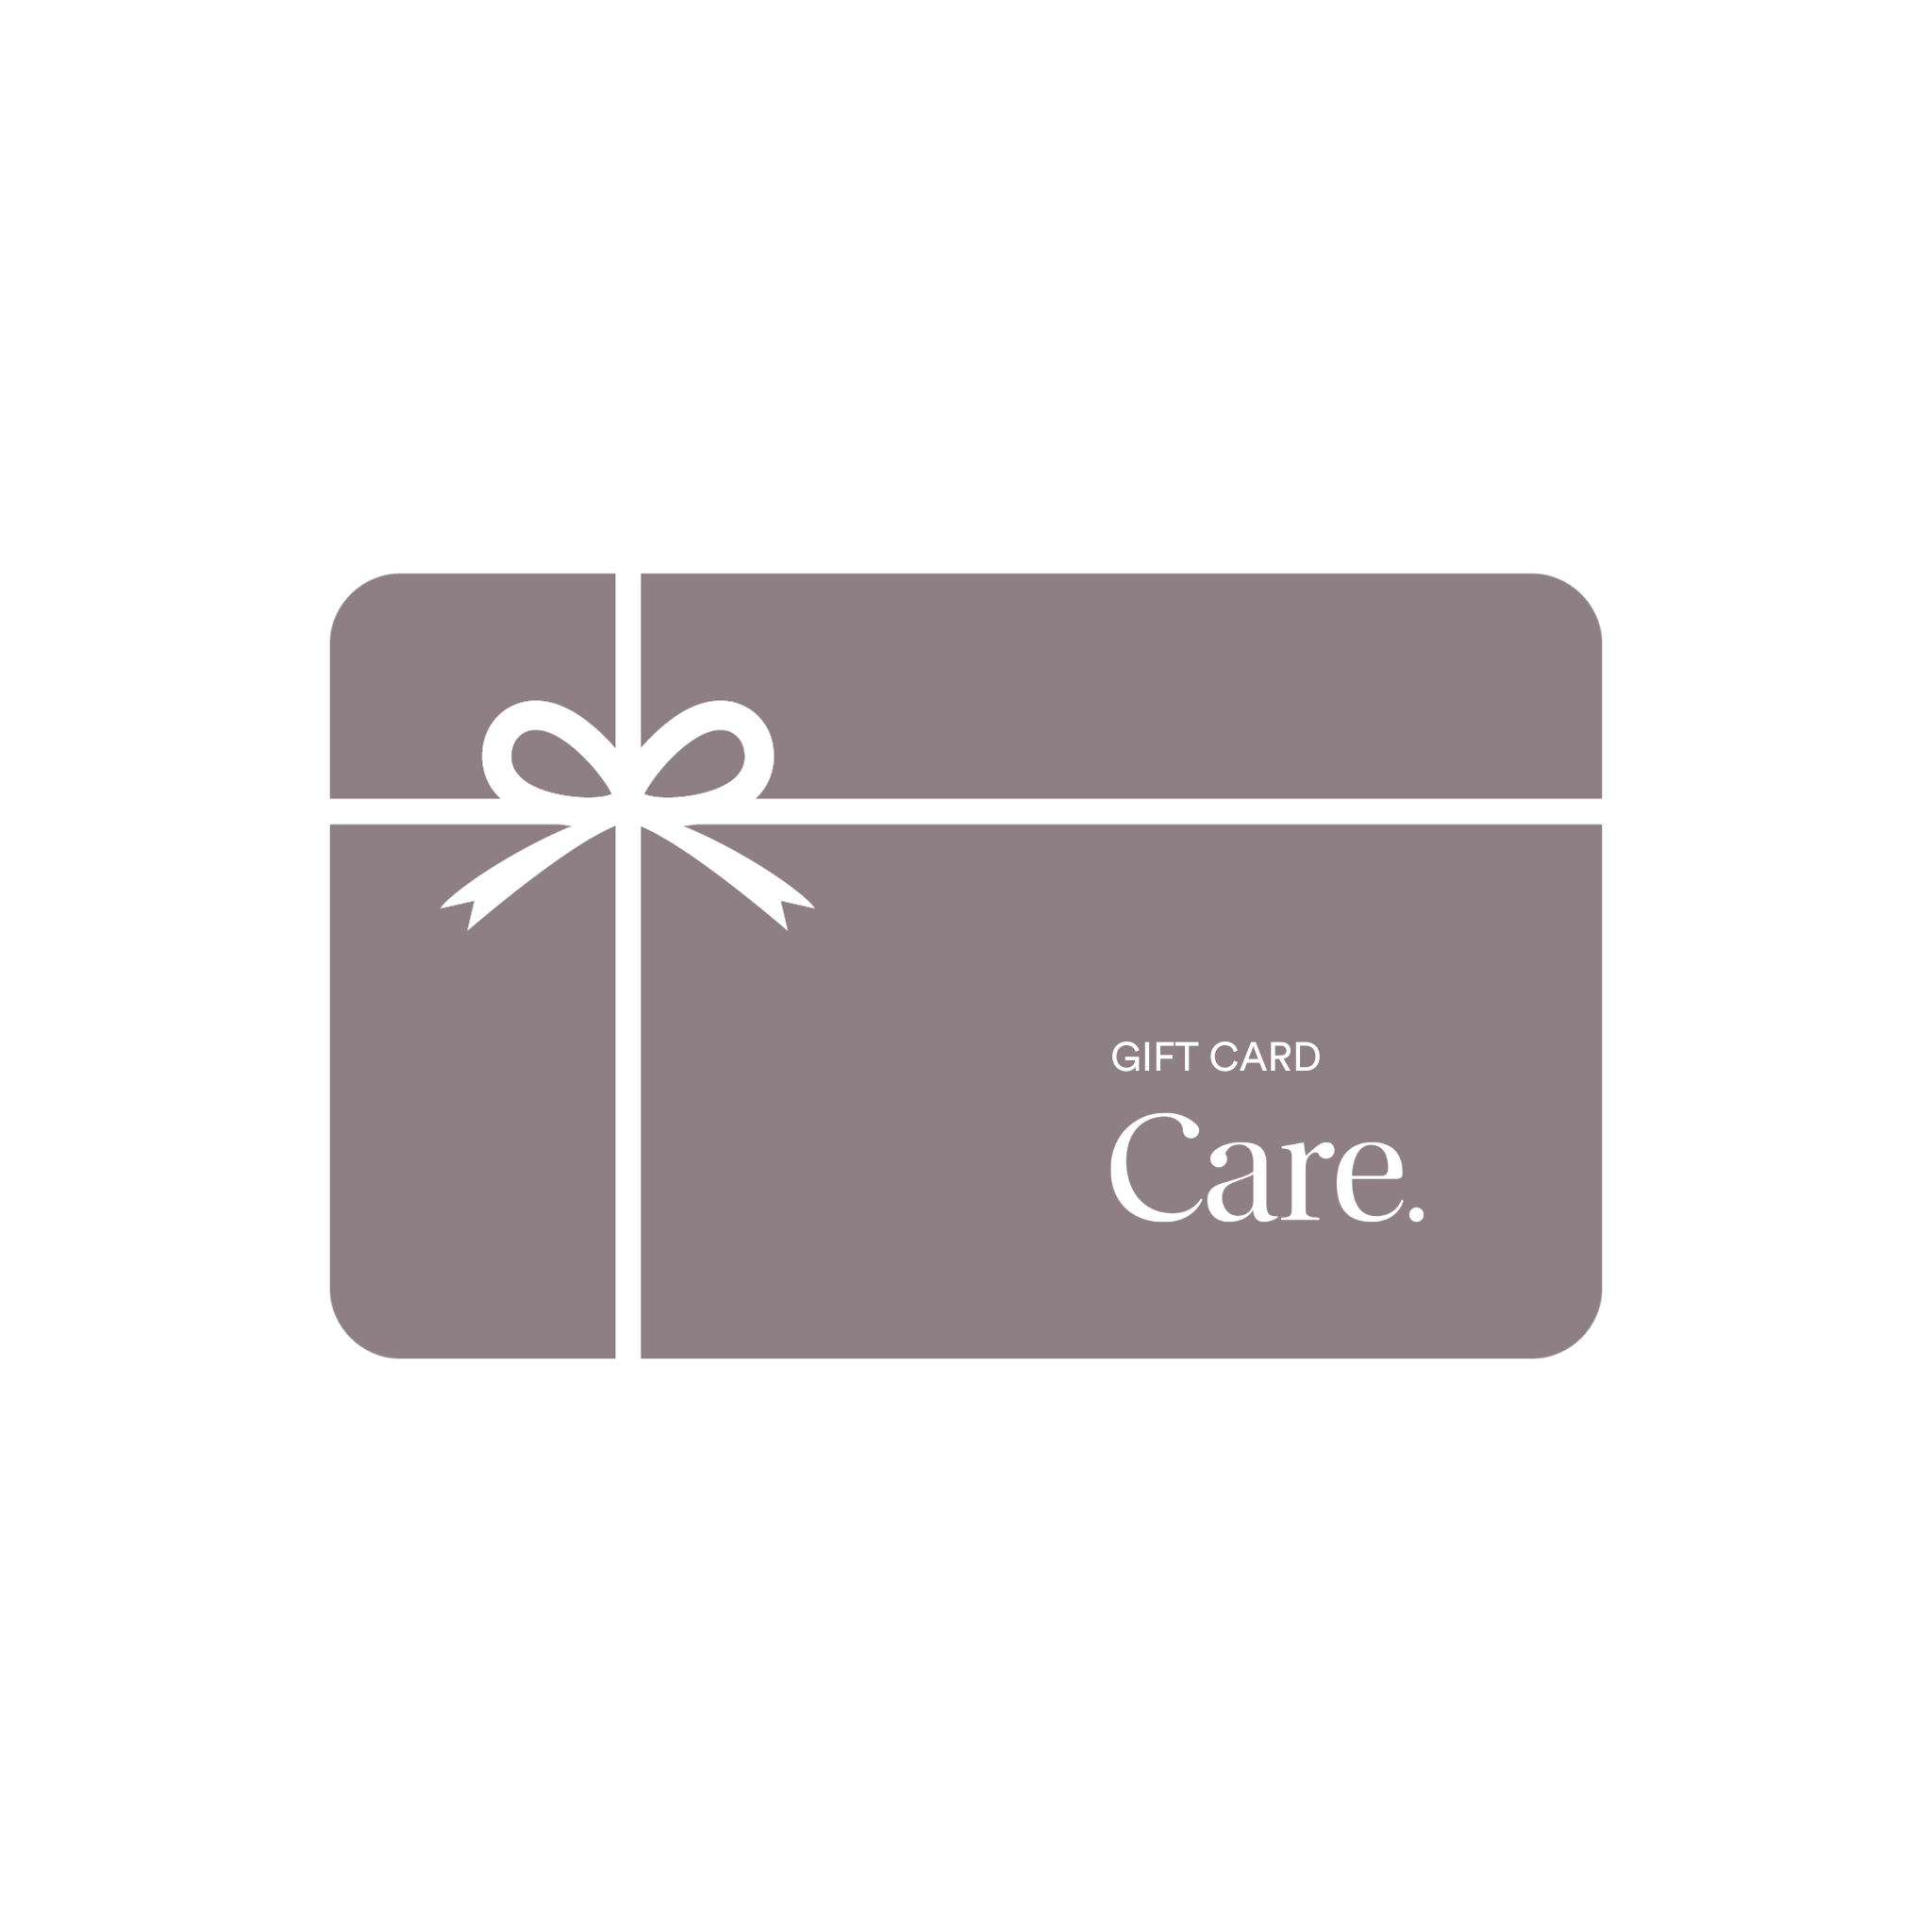 CARE Skincare – The simplest way to transform your skin.